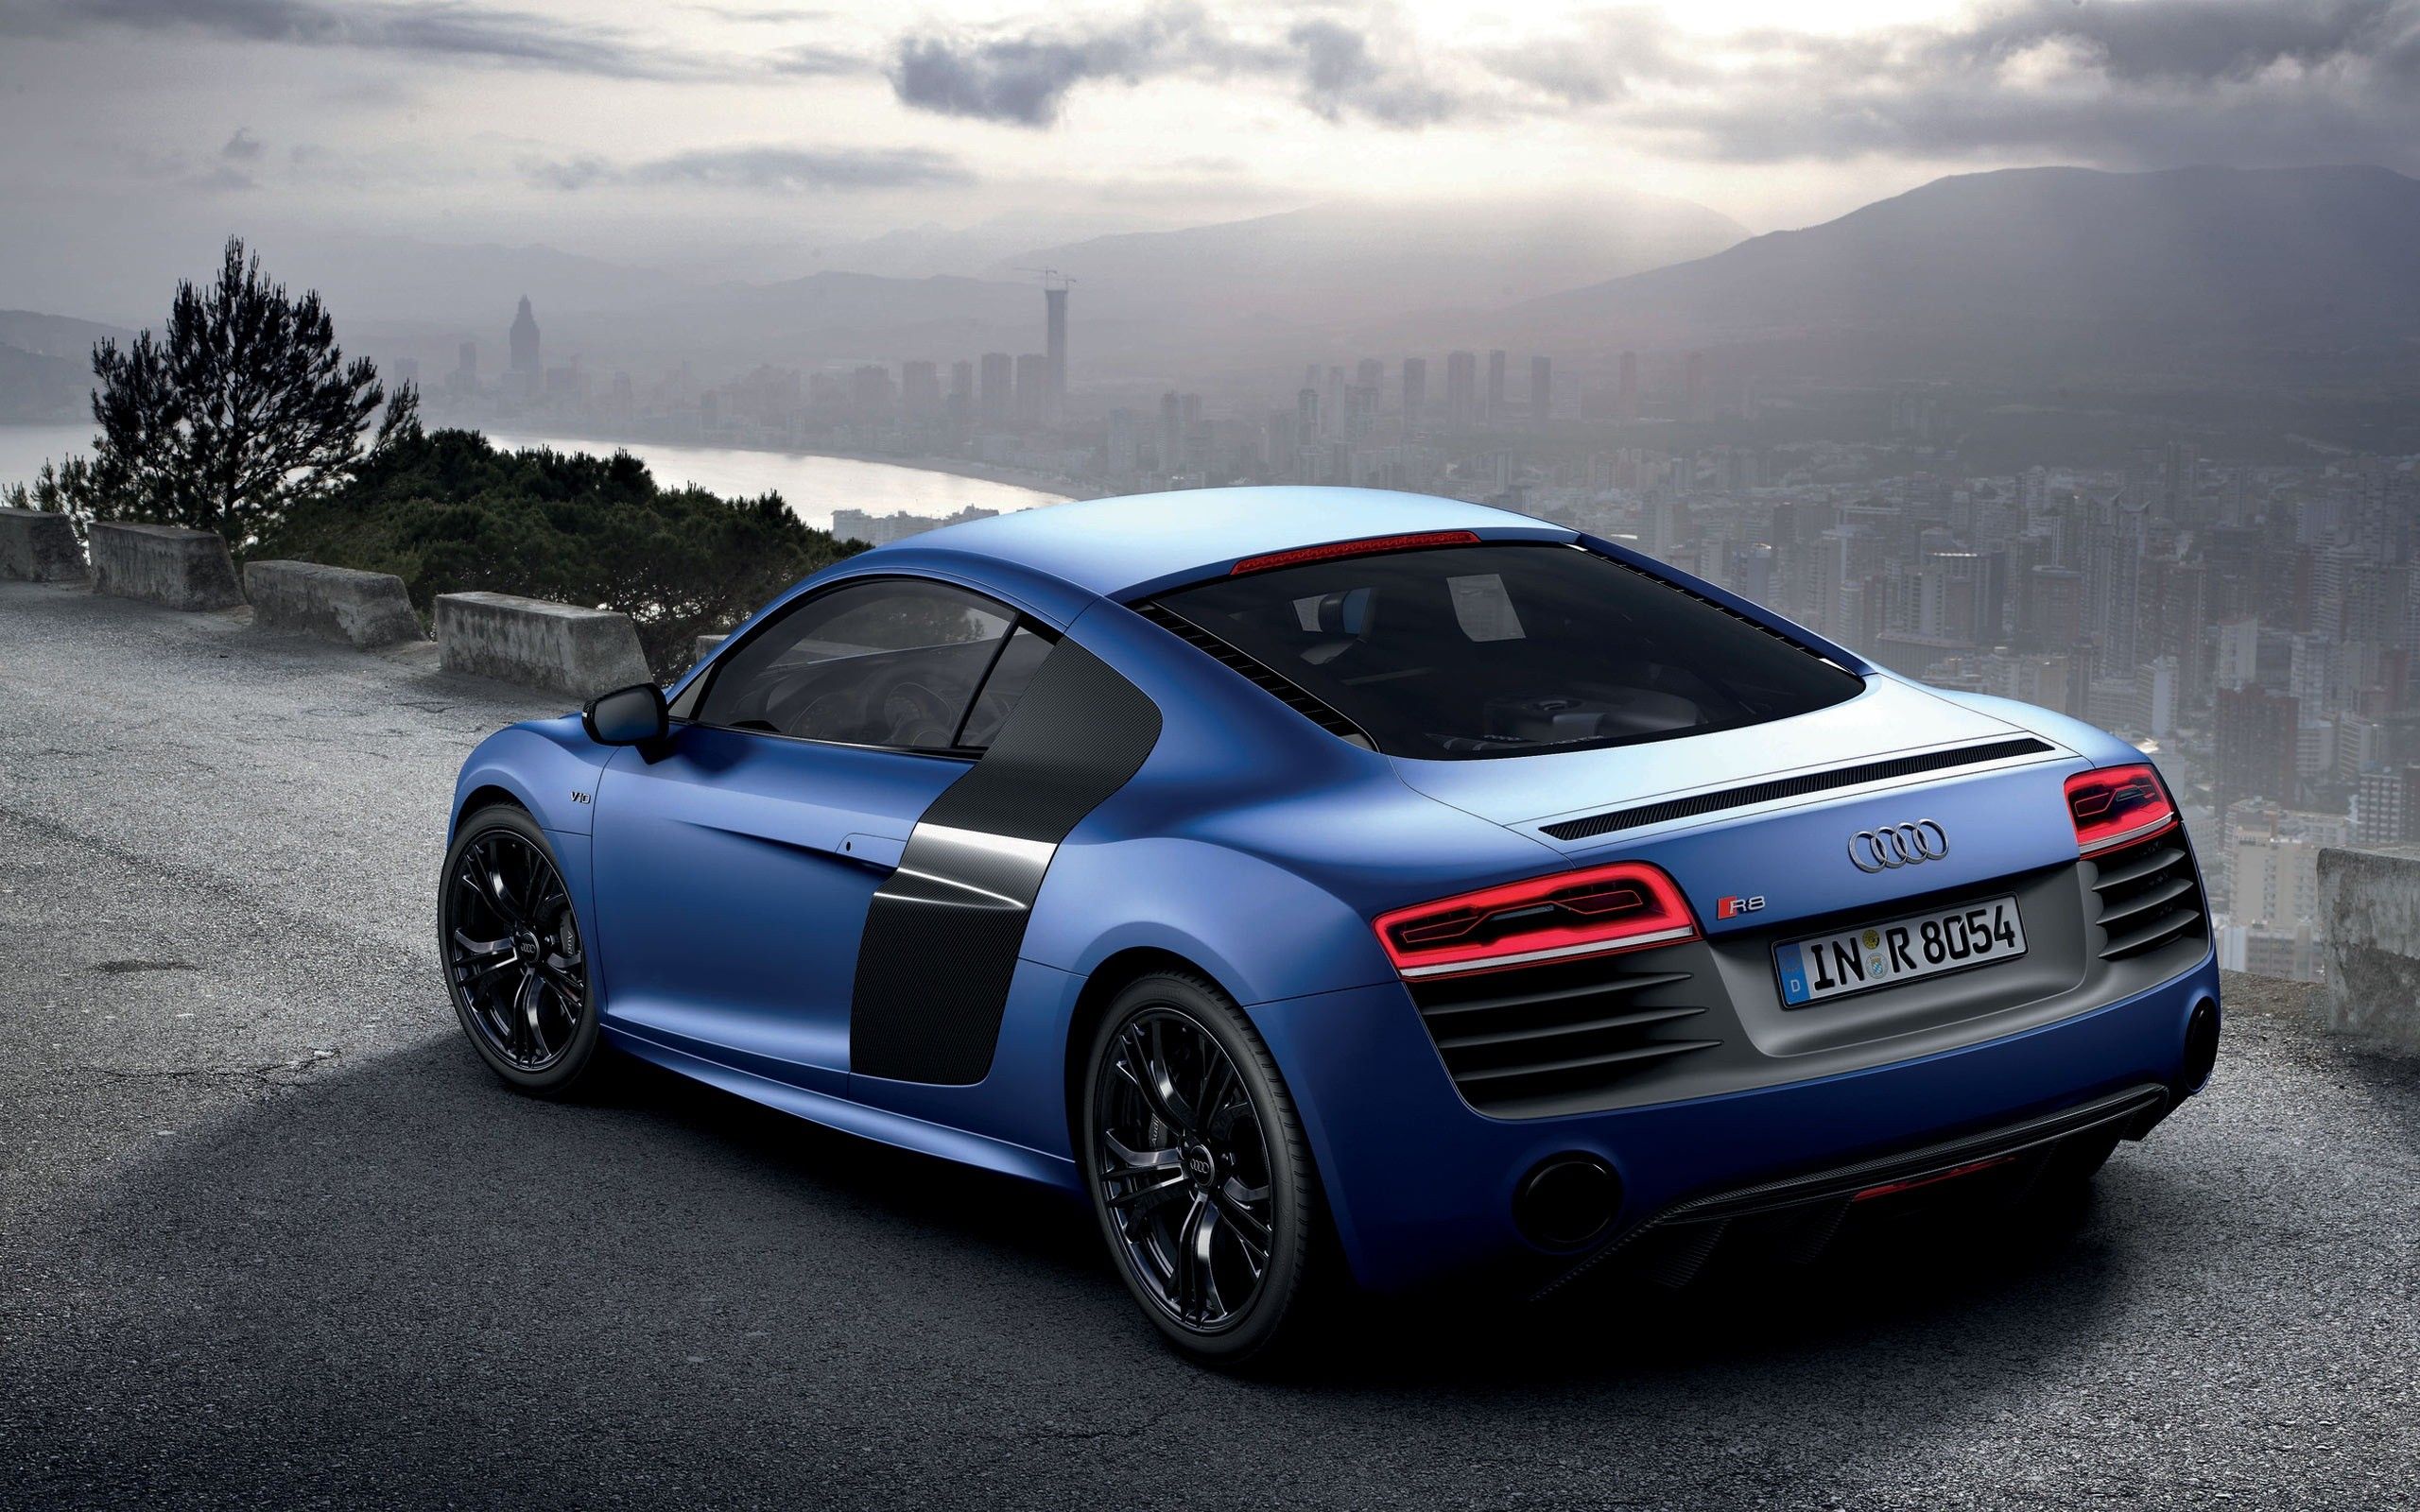 Daily Wallpaper: Audi R8 V10. I Like To Waste My Time